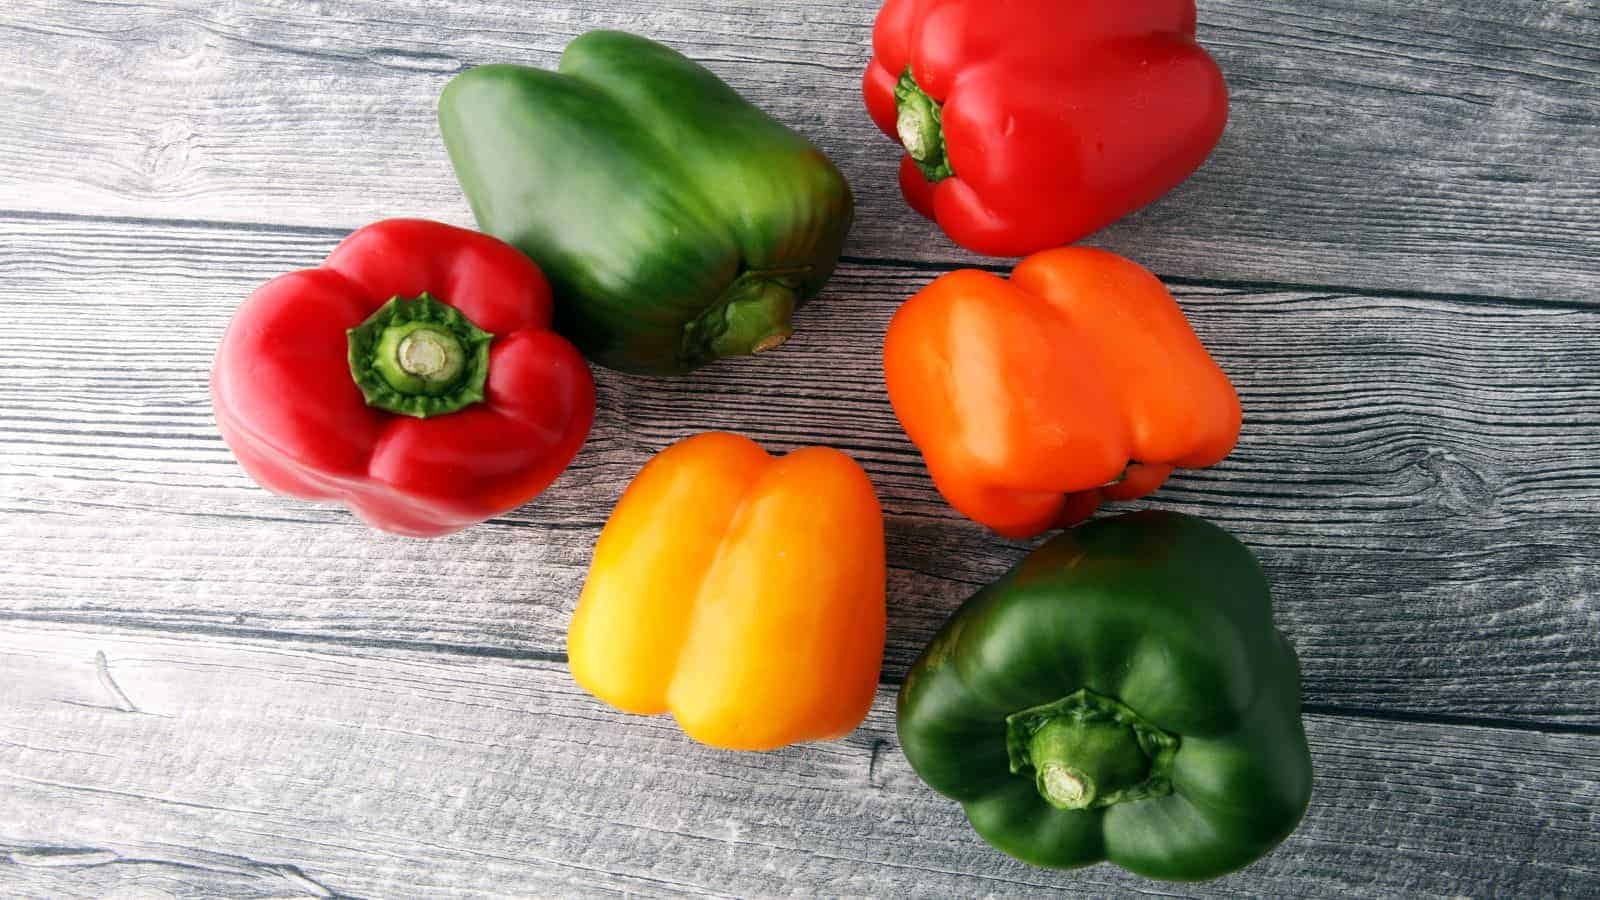 Nutritionists Reveal 10 Healthy Reasons to Eat Bell Peppers